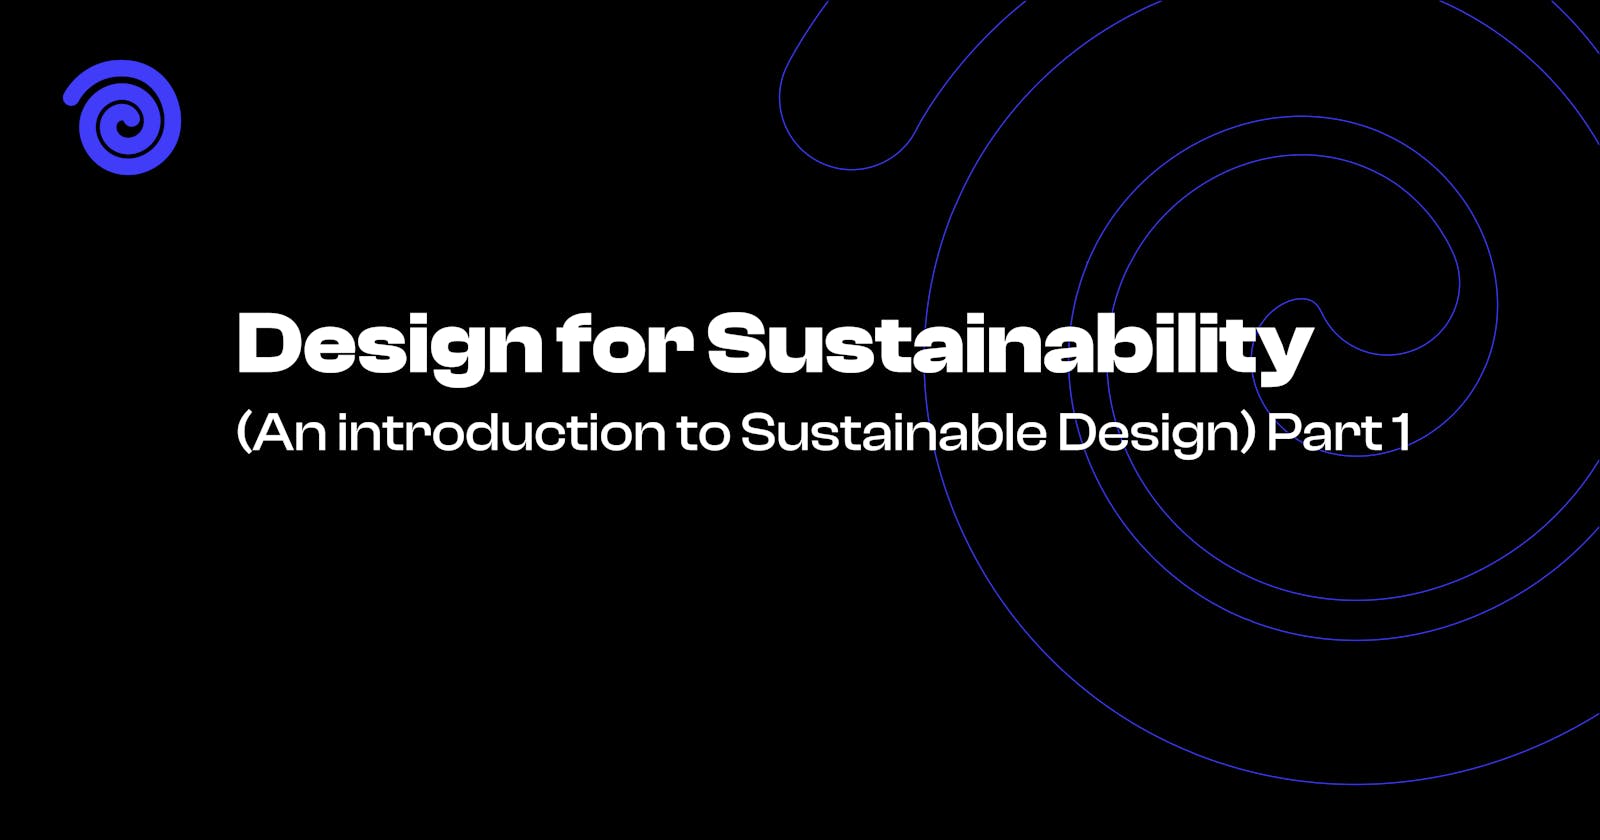 Design for Sustainability (Part 1)